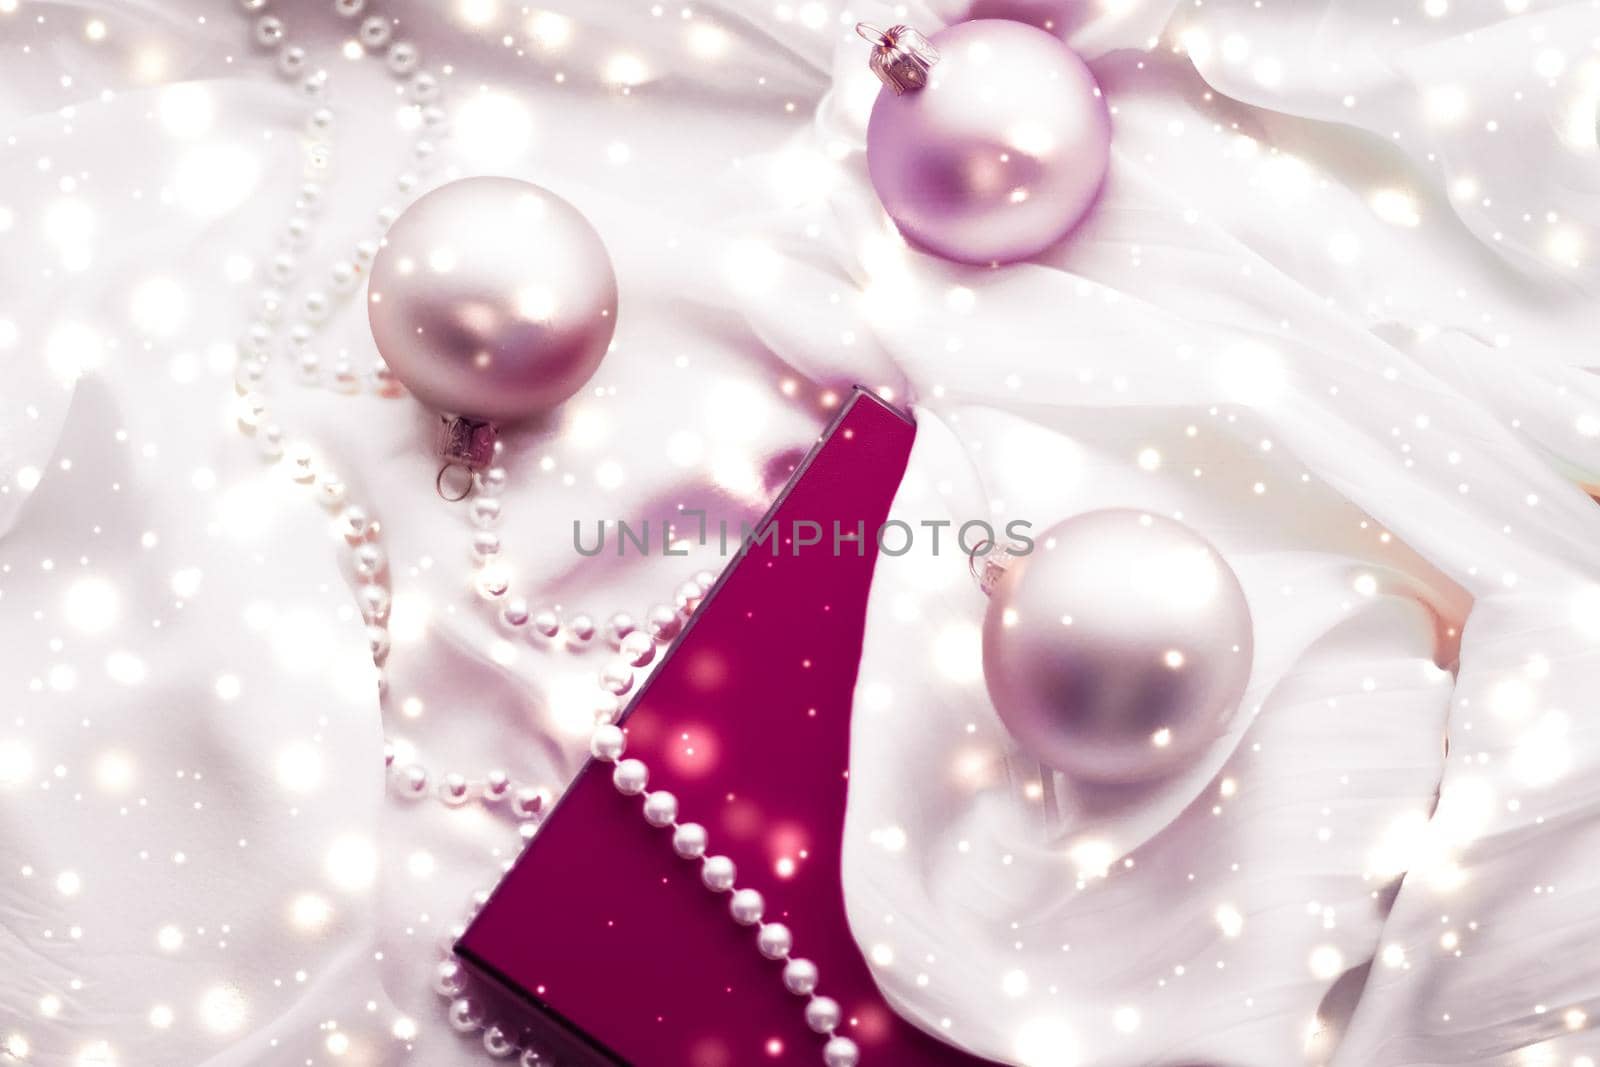 Holidays branding, glamour and decoration concept - Christmas magic holiday background, festive baubles, maroon vintage gift box and golden glitter as winter season present for luxury brand design